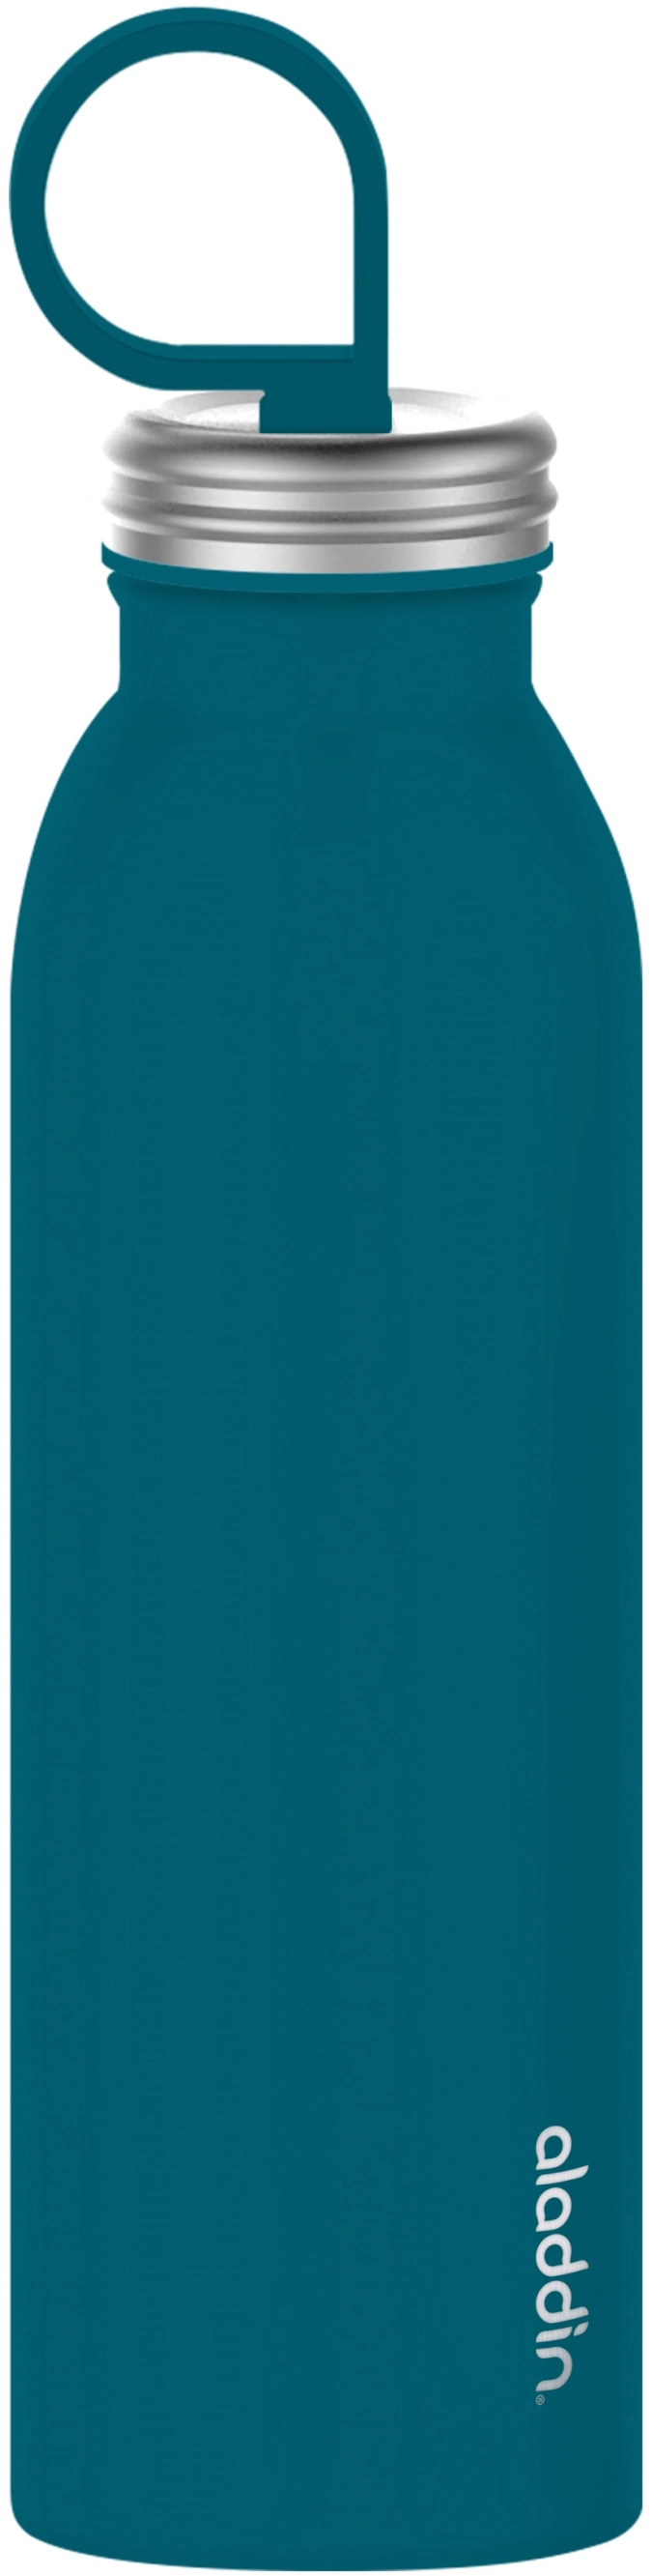 Chilled Thermavac Stain. St. Water Bottle 0.55L Aqua Blue